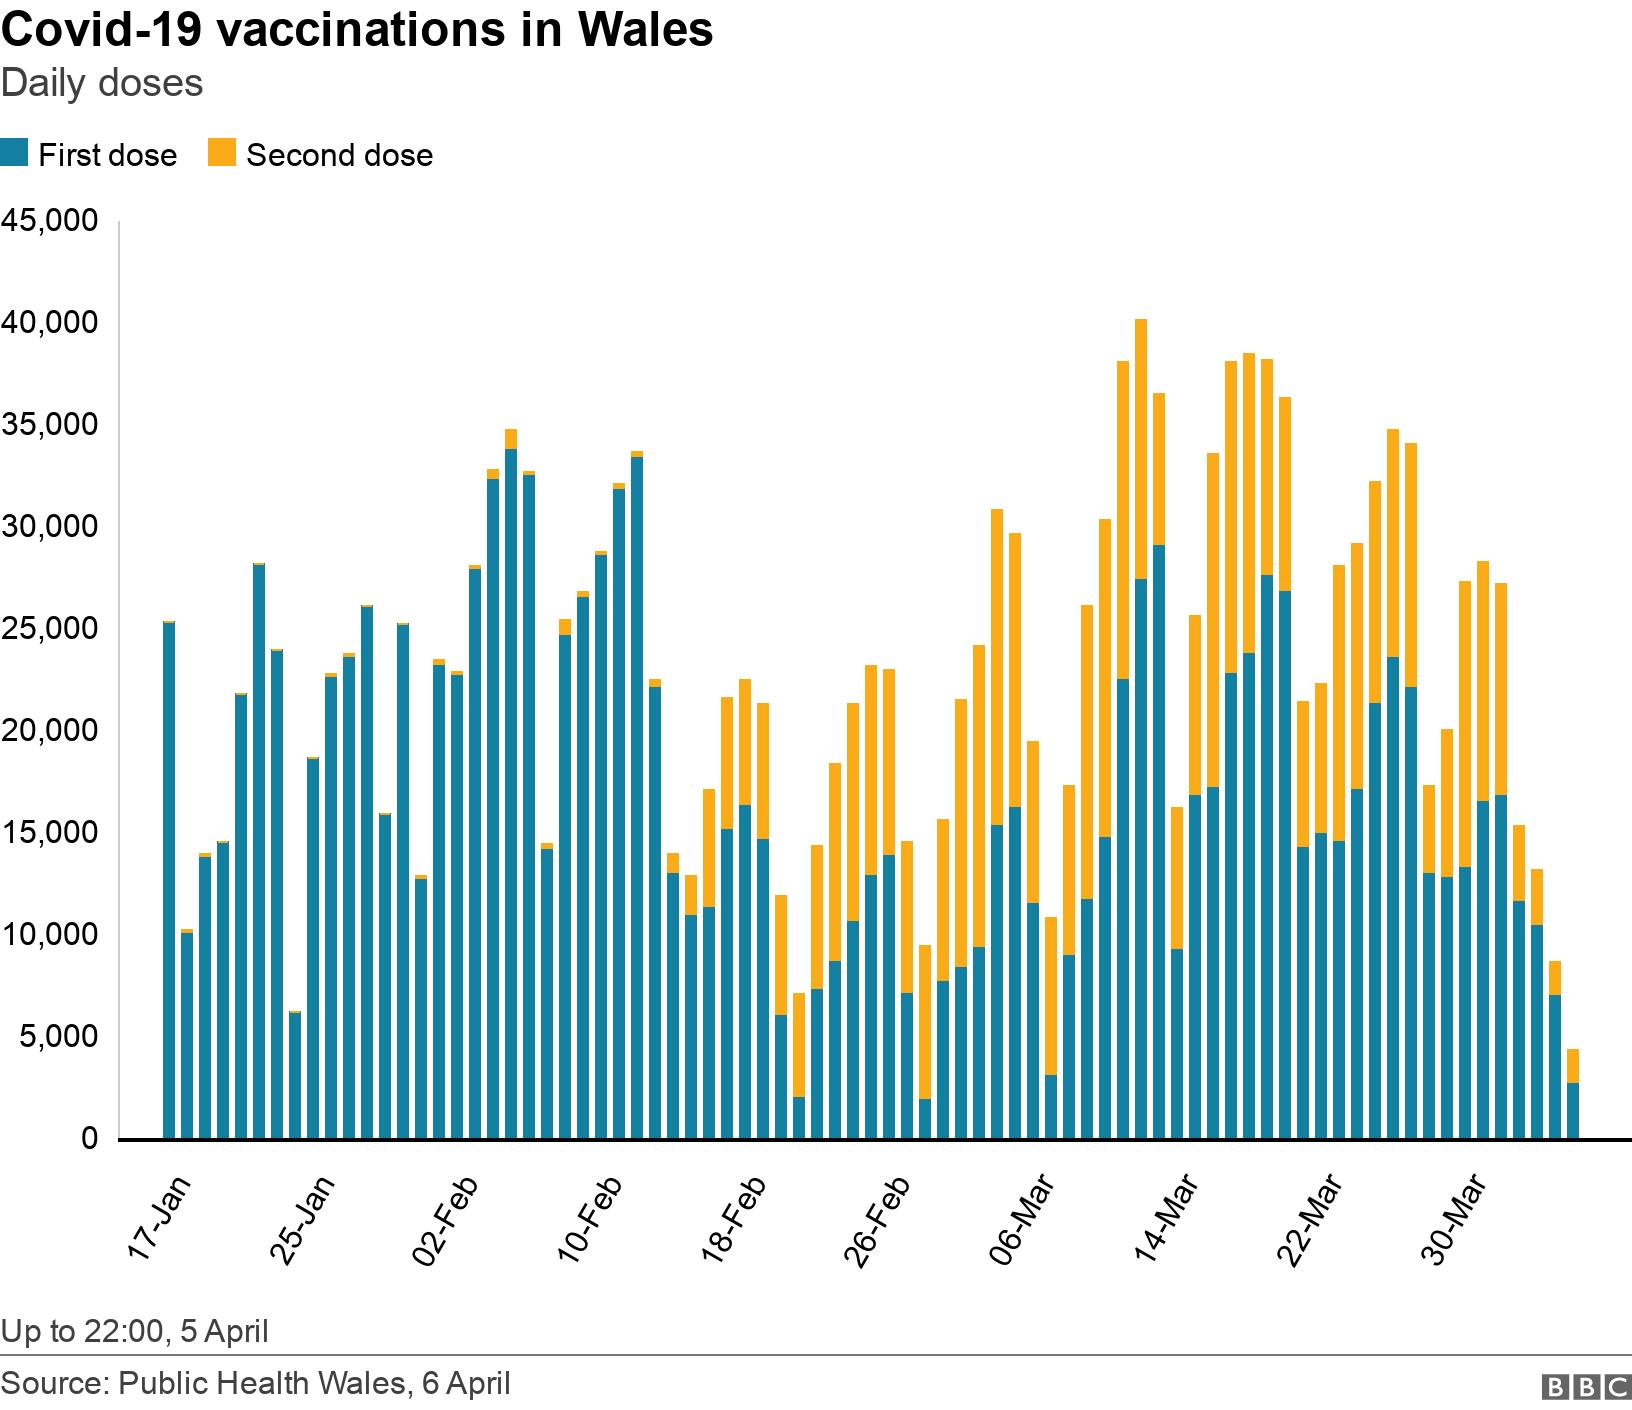 Covid-19 vaccinations in Wales. Daily doses .  Up to 22:00, 5 April.